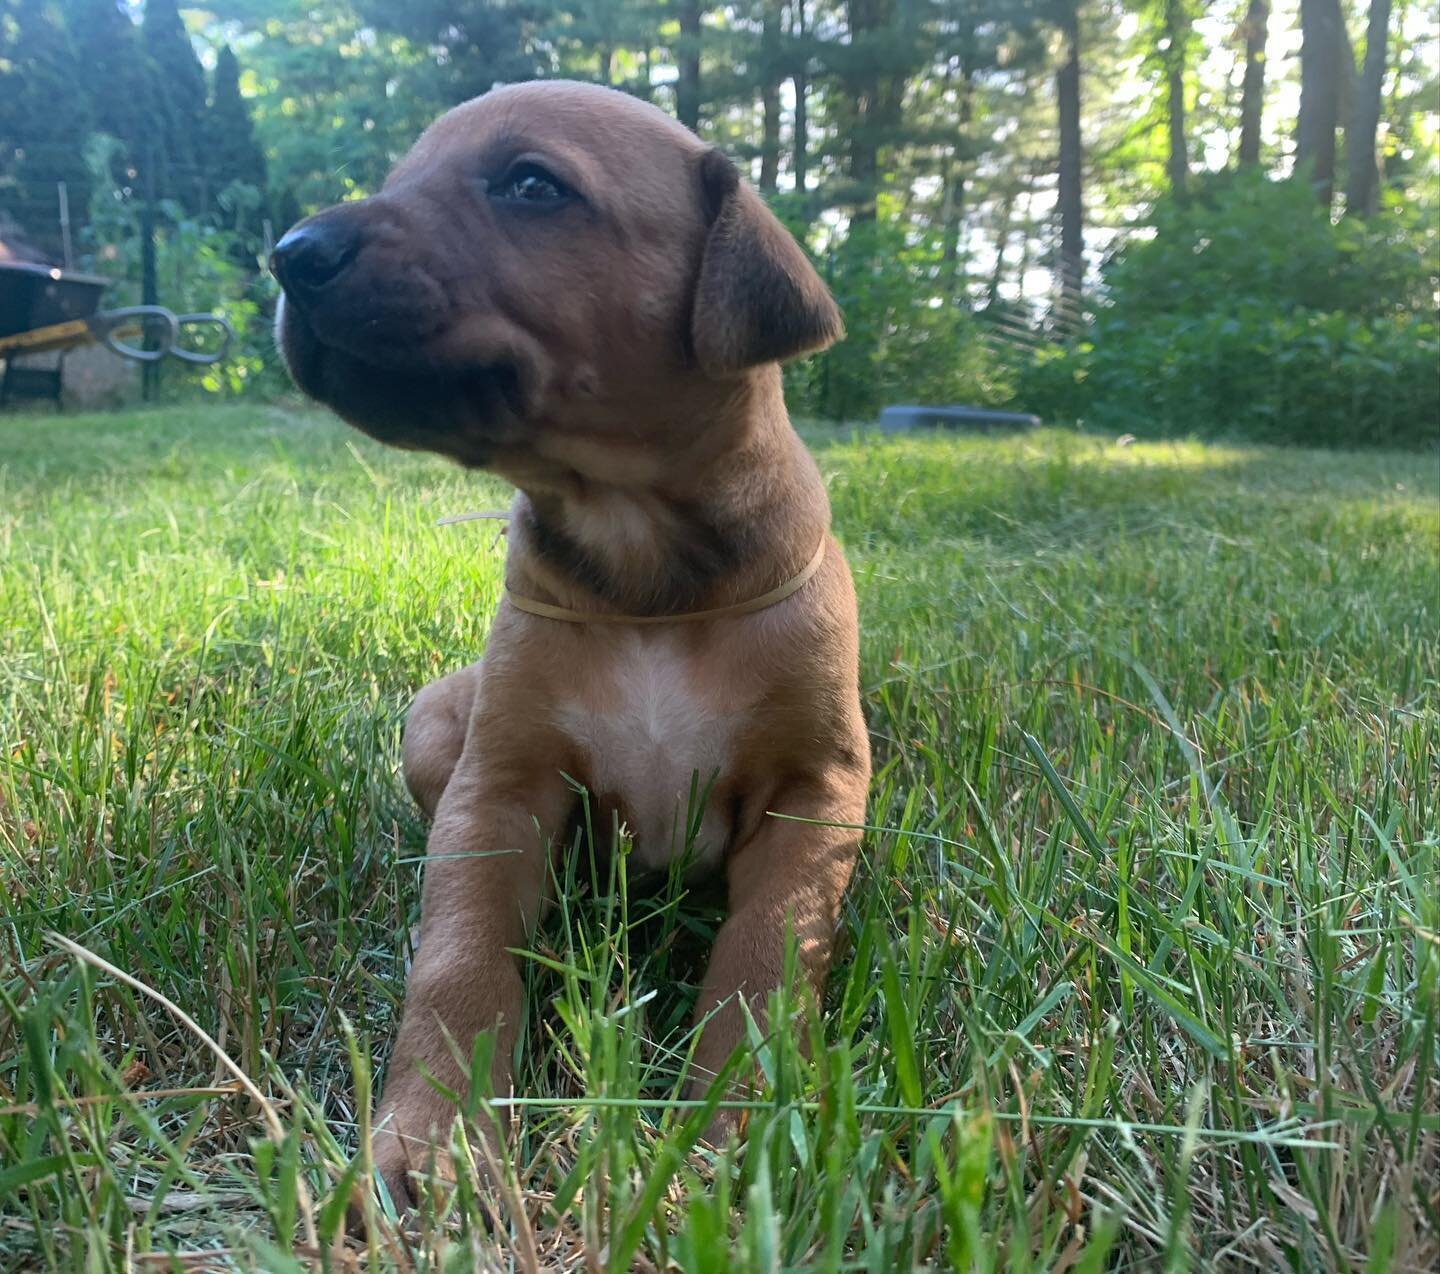 Four weeks old on Sunday! Went outside.
#rhodesianridgeback #rr #shabanirr #shabanirhodesianridgebacks #dog #dogs #puppy #puppies